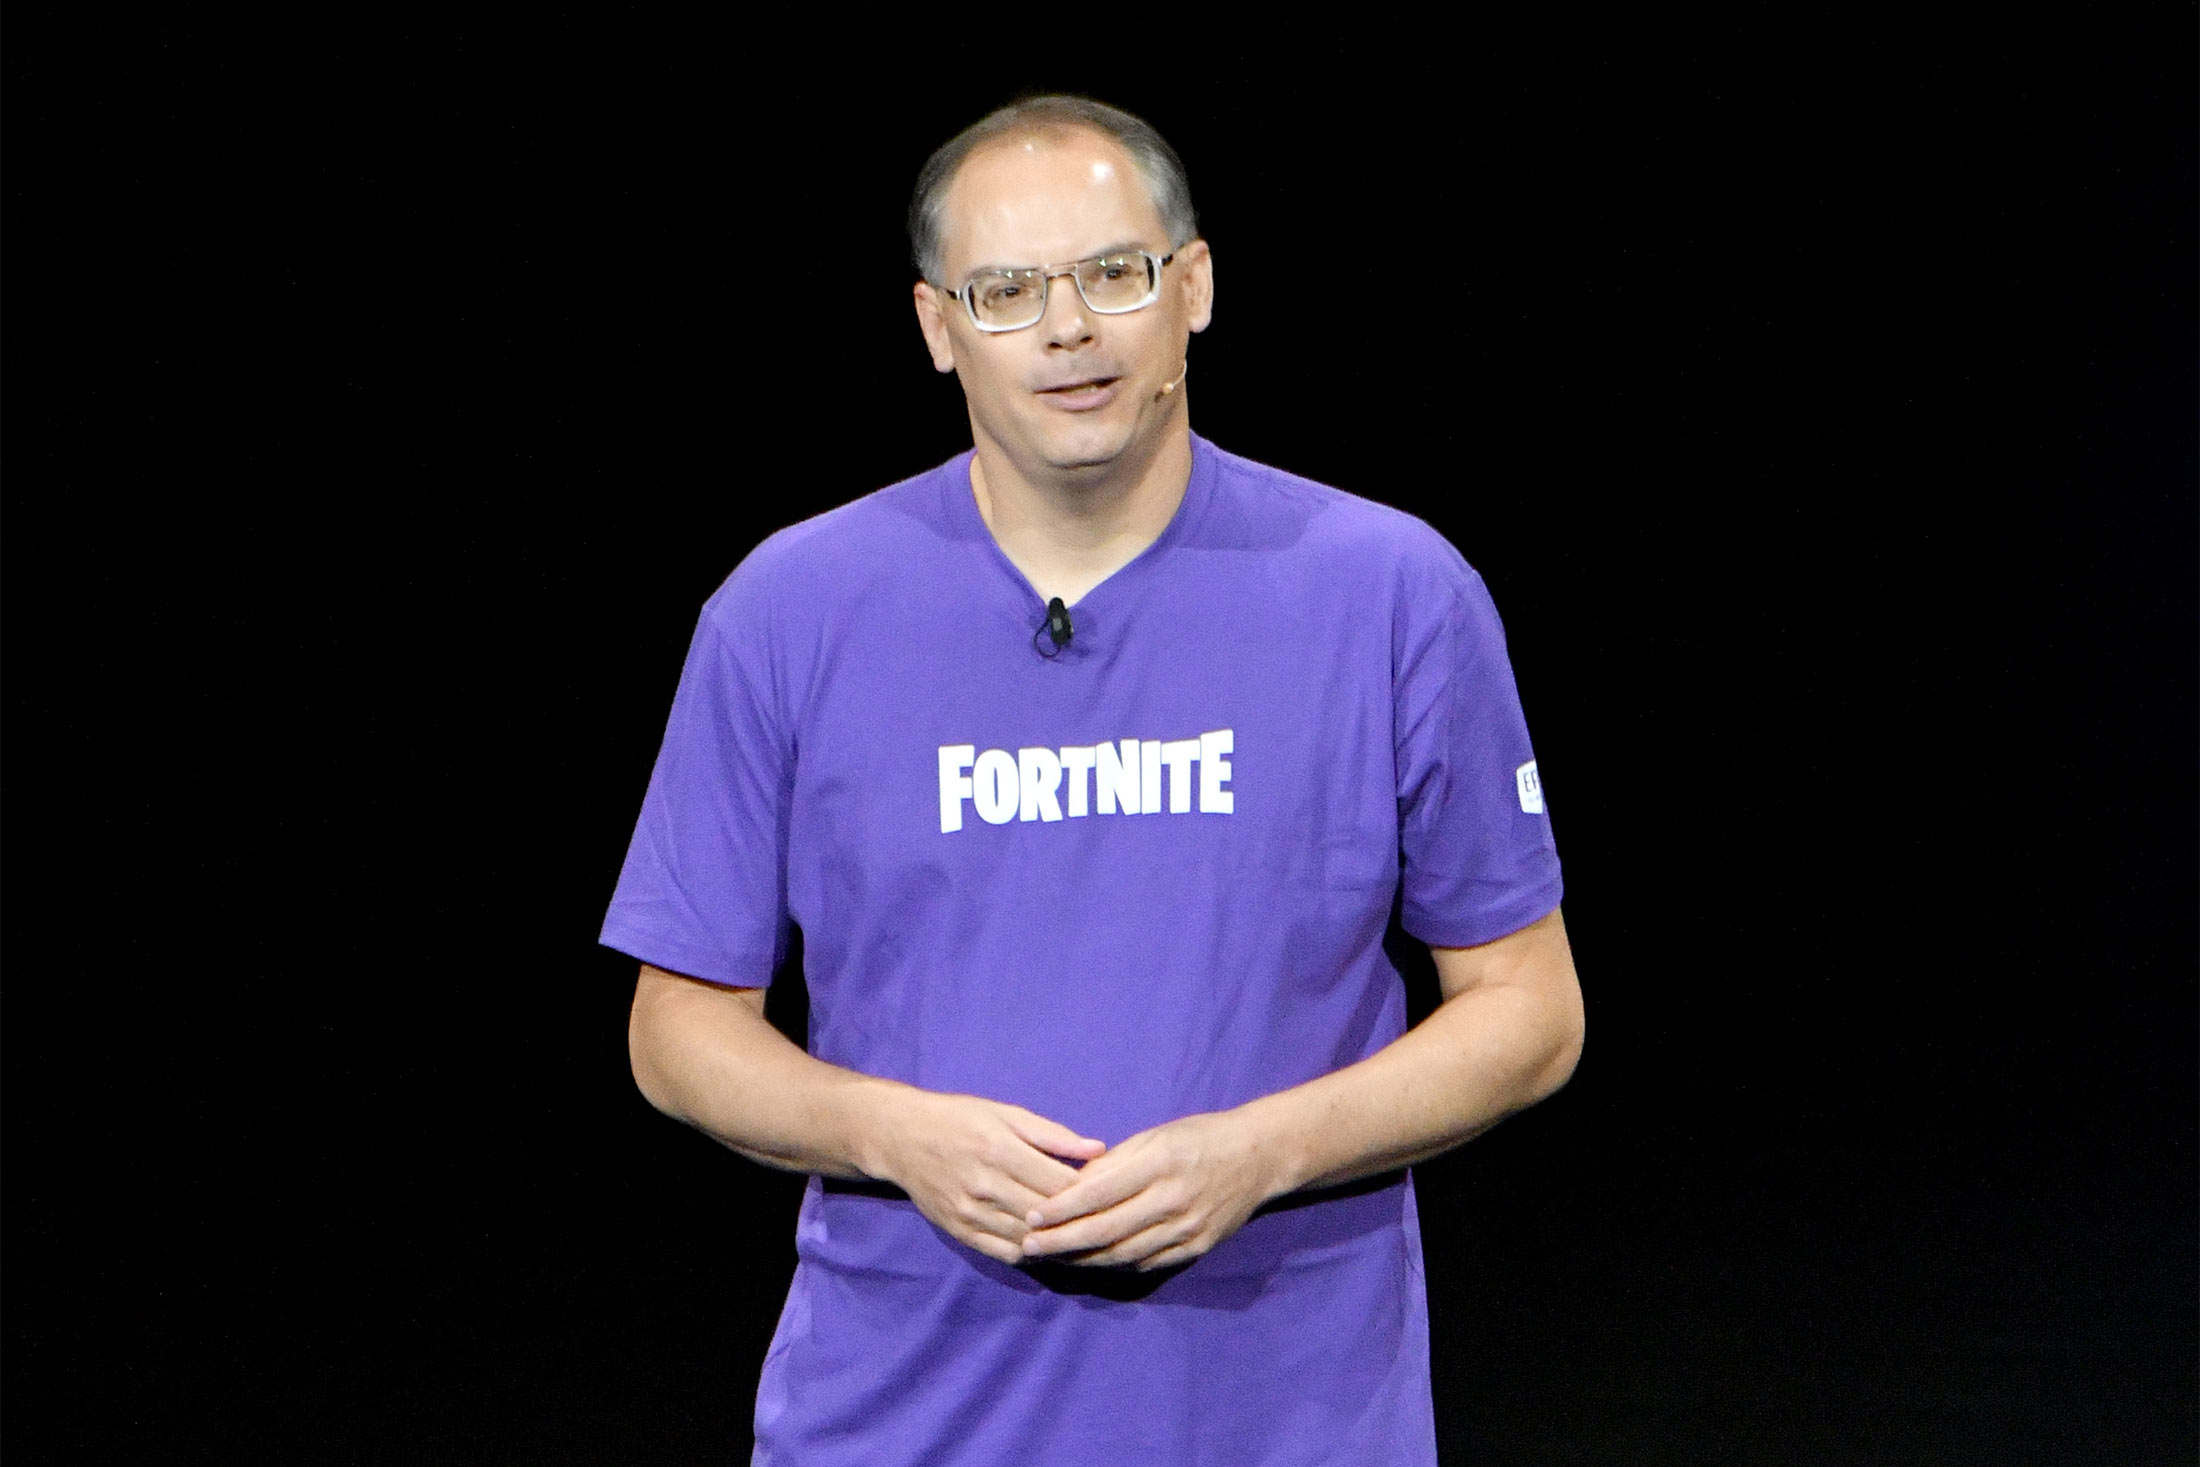 Fortnite S Sweeney Makes Career Out Of Crusade Against Big Tech Bloomberg